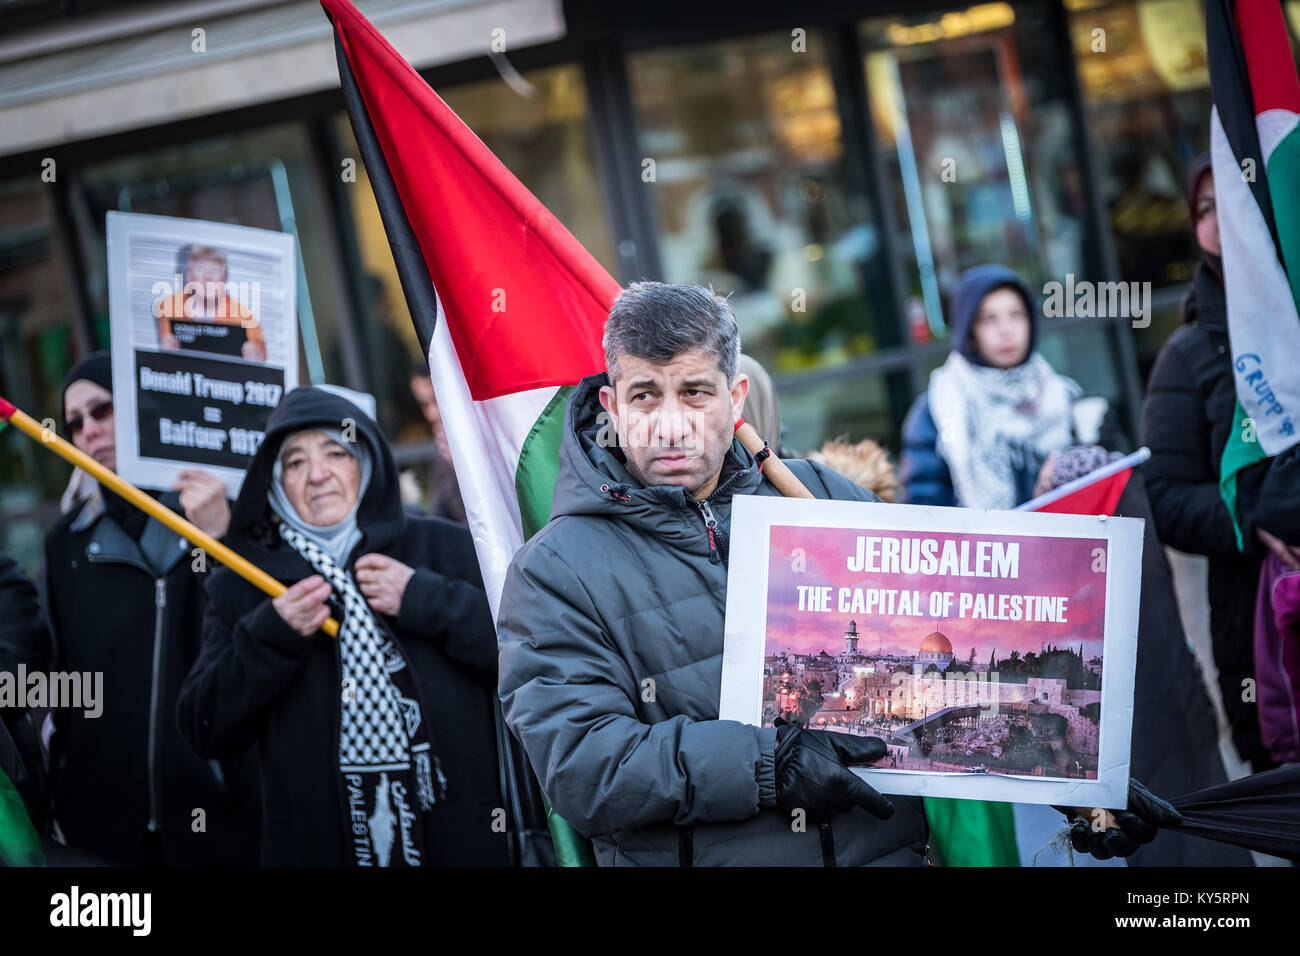 January 7, 2018 - MalmÃ, SkÃ¥ne, Sweden - A man seen holding a placard during the protest.Demonstration of protest against the decision of Donald Trump, in violation of the international right, to recognize Jerusalem as capital of Israel hosted in the city of Malmo. Credit: Magnus Persson/SOPA/ZUMA Wire/Alamy Live News Stock Photo